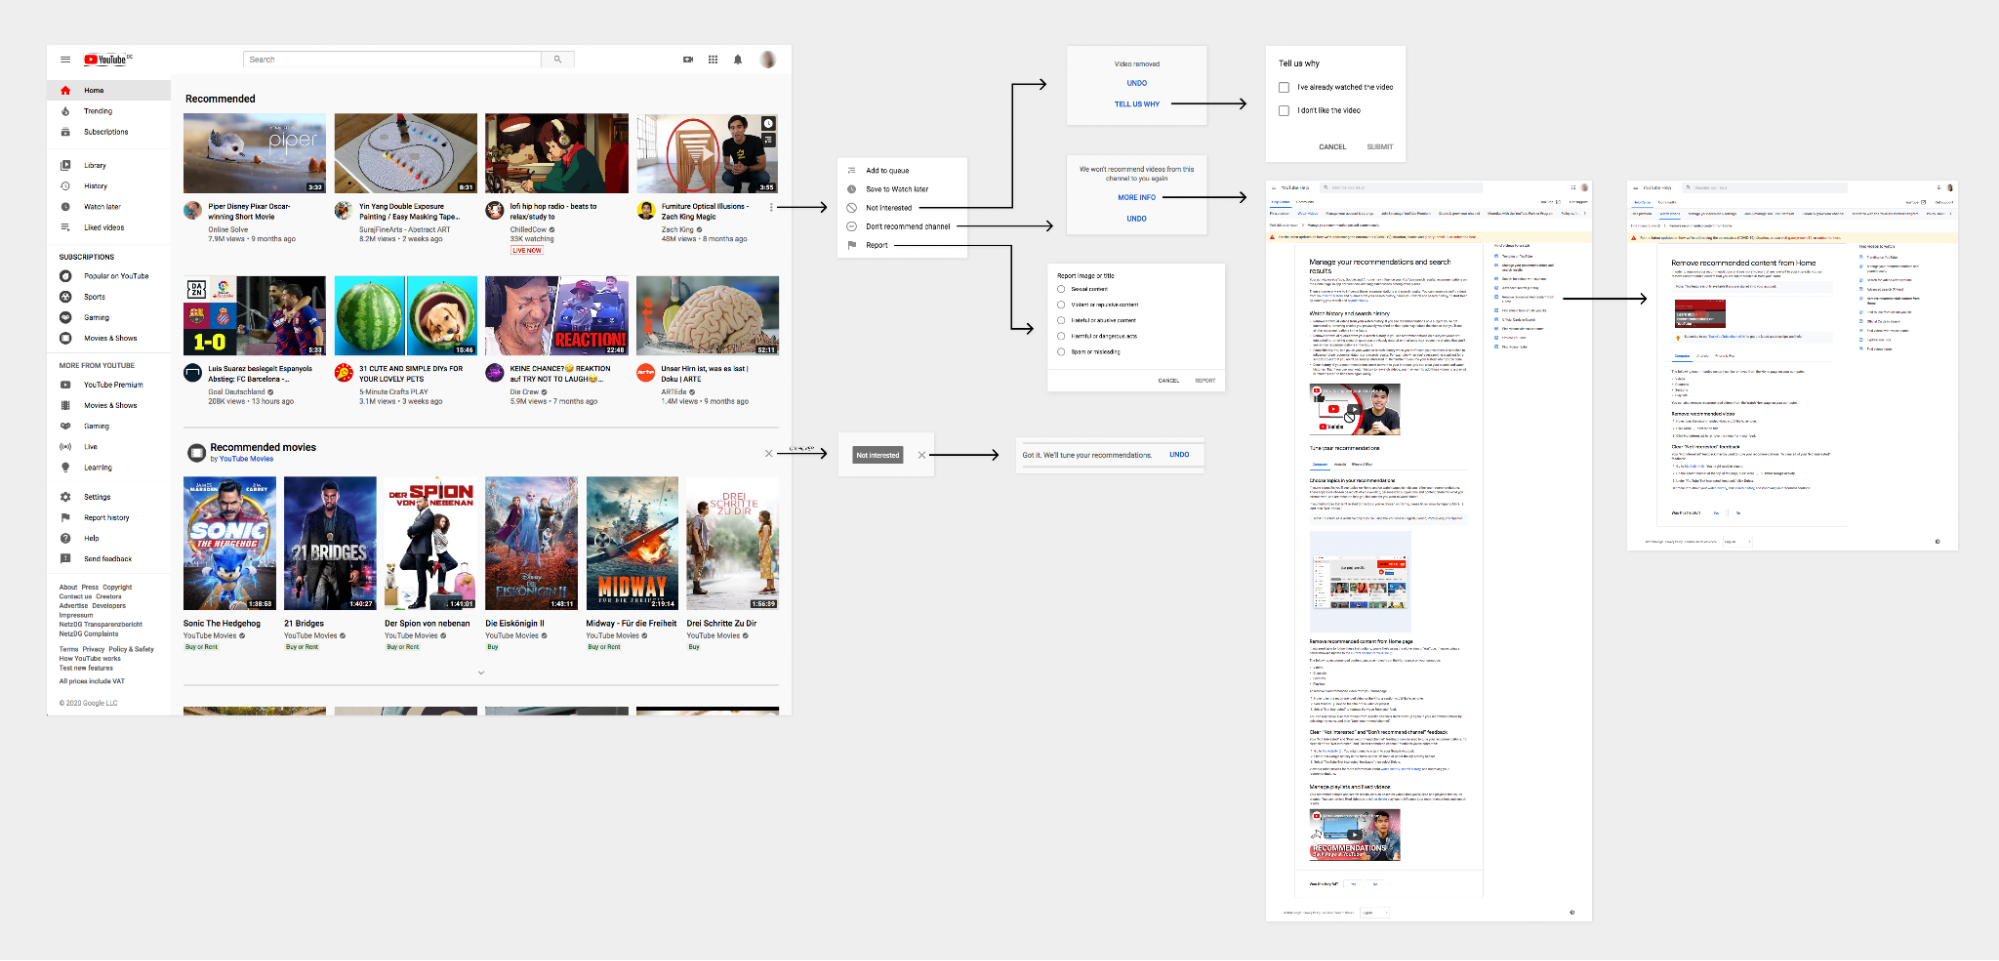 Mapping the path of user control on the YouTube ‘Home’.